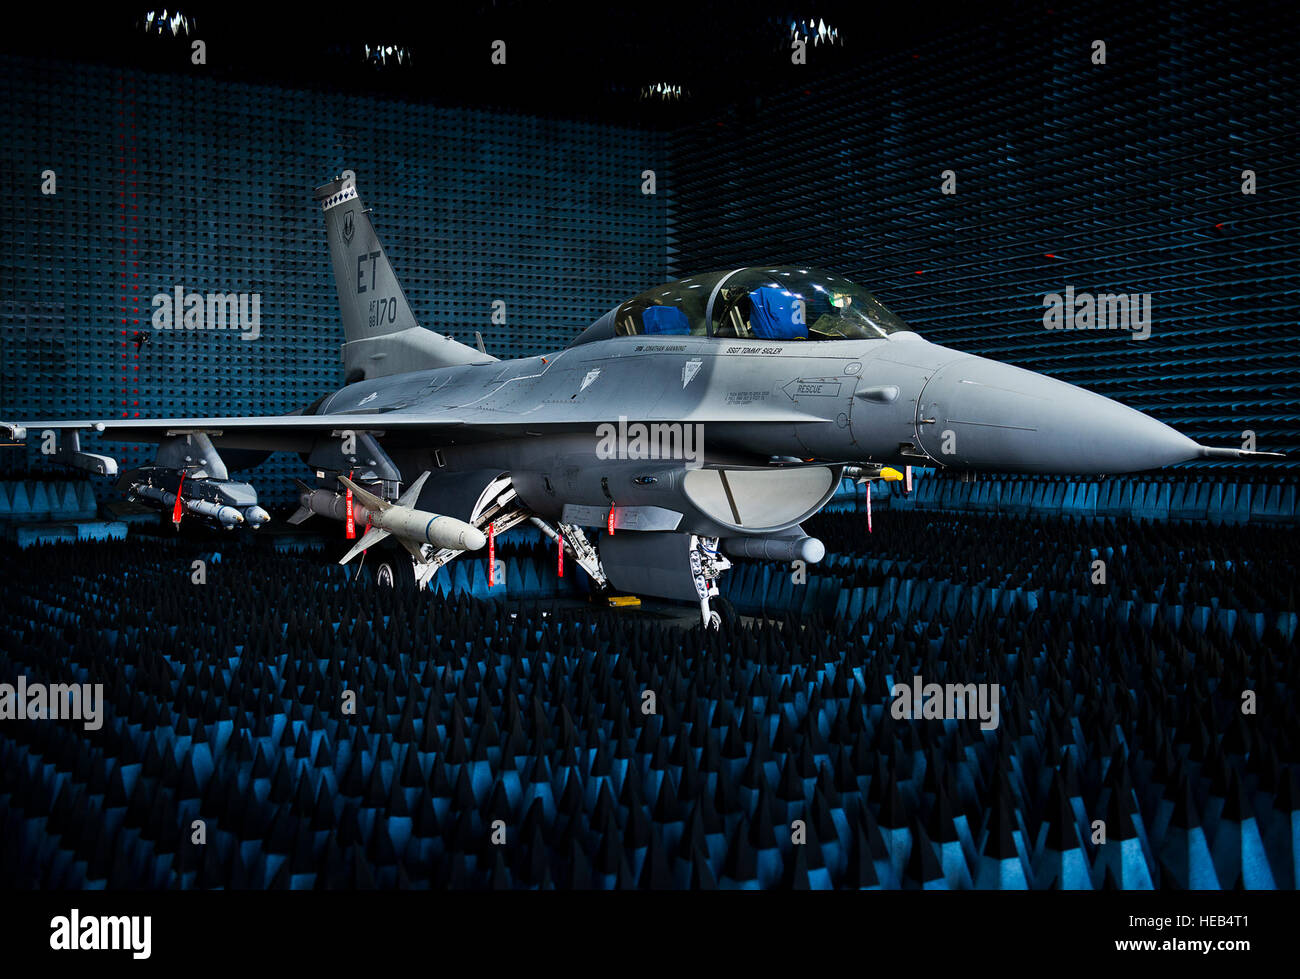 A 40th Flight Test Squadron F-16 Fighting Falcon sits in the anechoic chamber after completion of the initial round of testing simulations on the new M-7 software upgrade Oct. 30, 2014, at Eglin Air Force Base, Fla. The M-7 software package will provide multiple advanced capabilities to the aircraft. The anechoic chamber is a room designed to stop reflections of either sound or electromagnetic waves. The room is insulated from exterior sources of noise. The room is part of a facility that allows testing of air-to-air and air-to-surface munitions and electronics systems on full-scale aircraft a Stock Photo